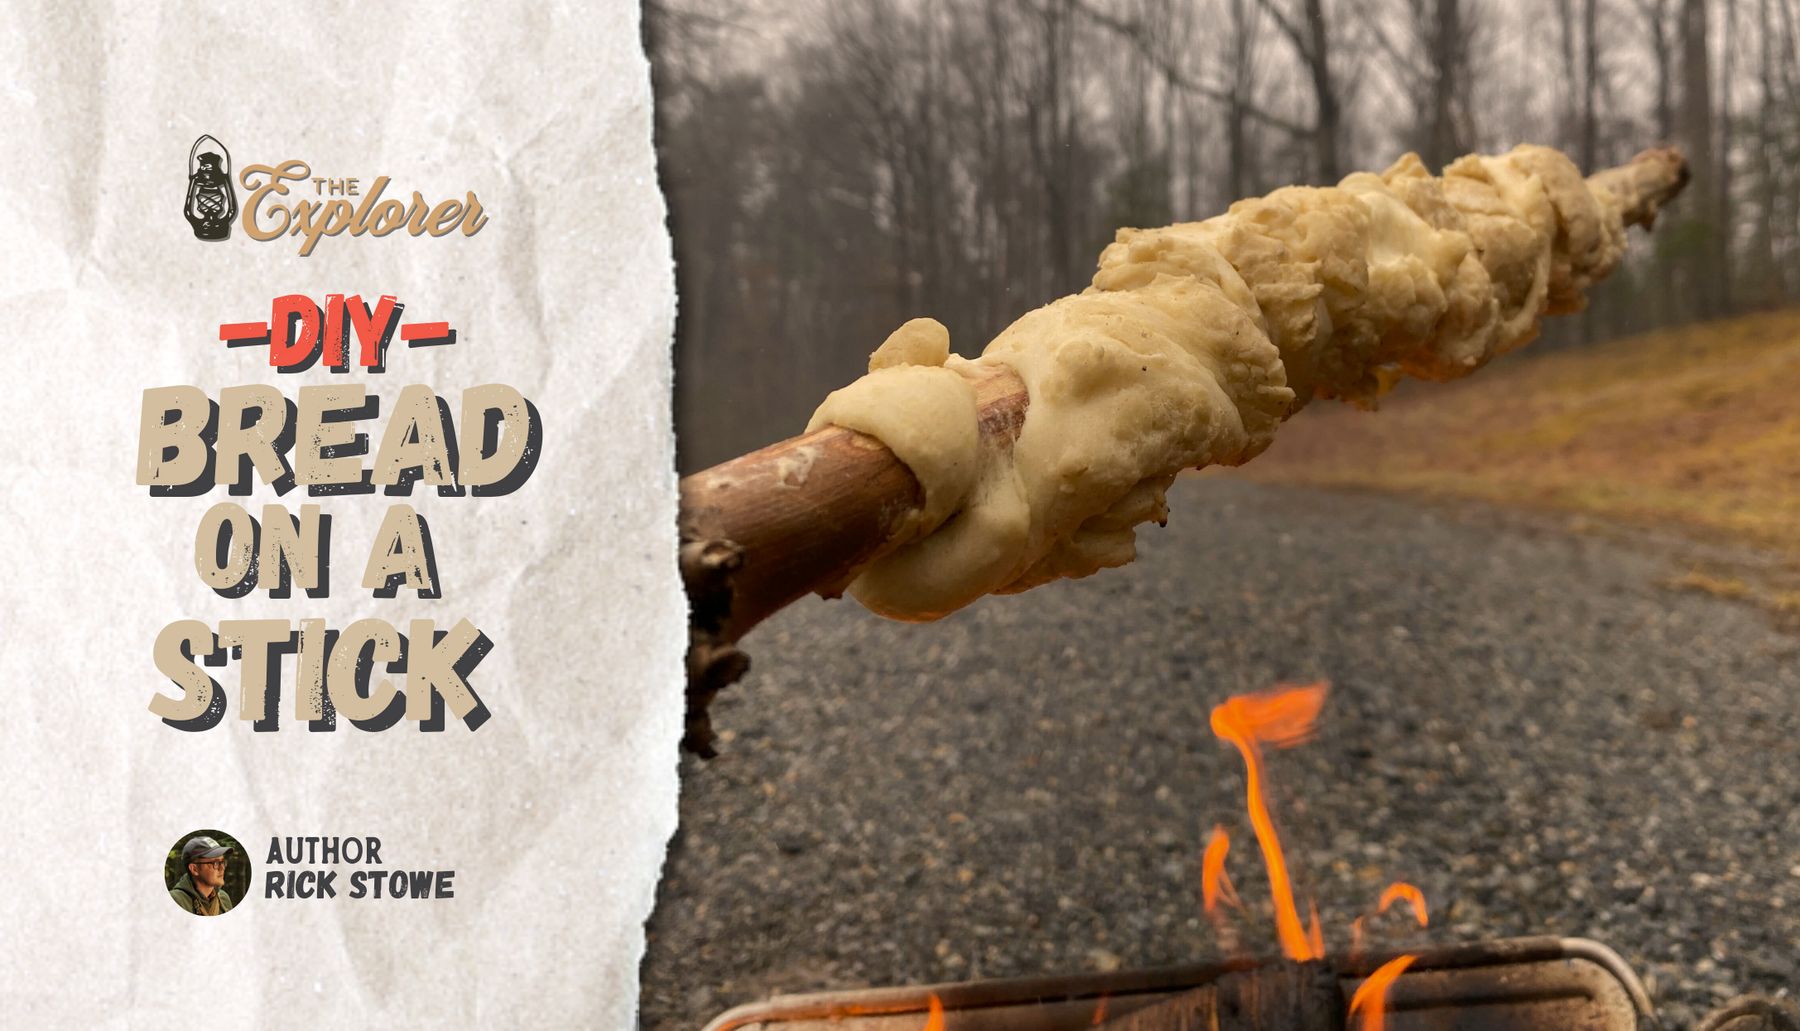 How to Cook Bread-on-a-stick Over A Fire